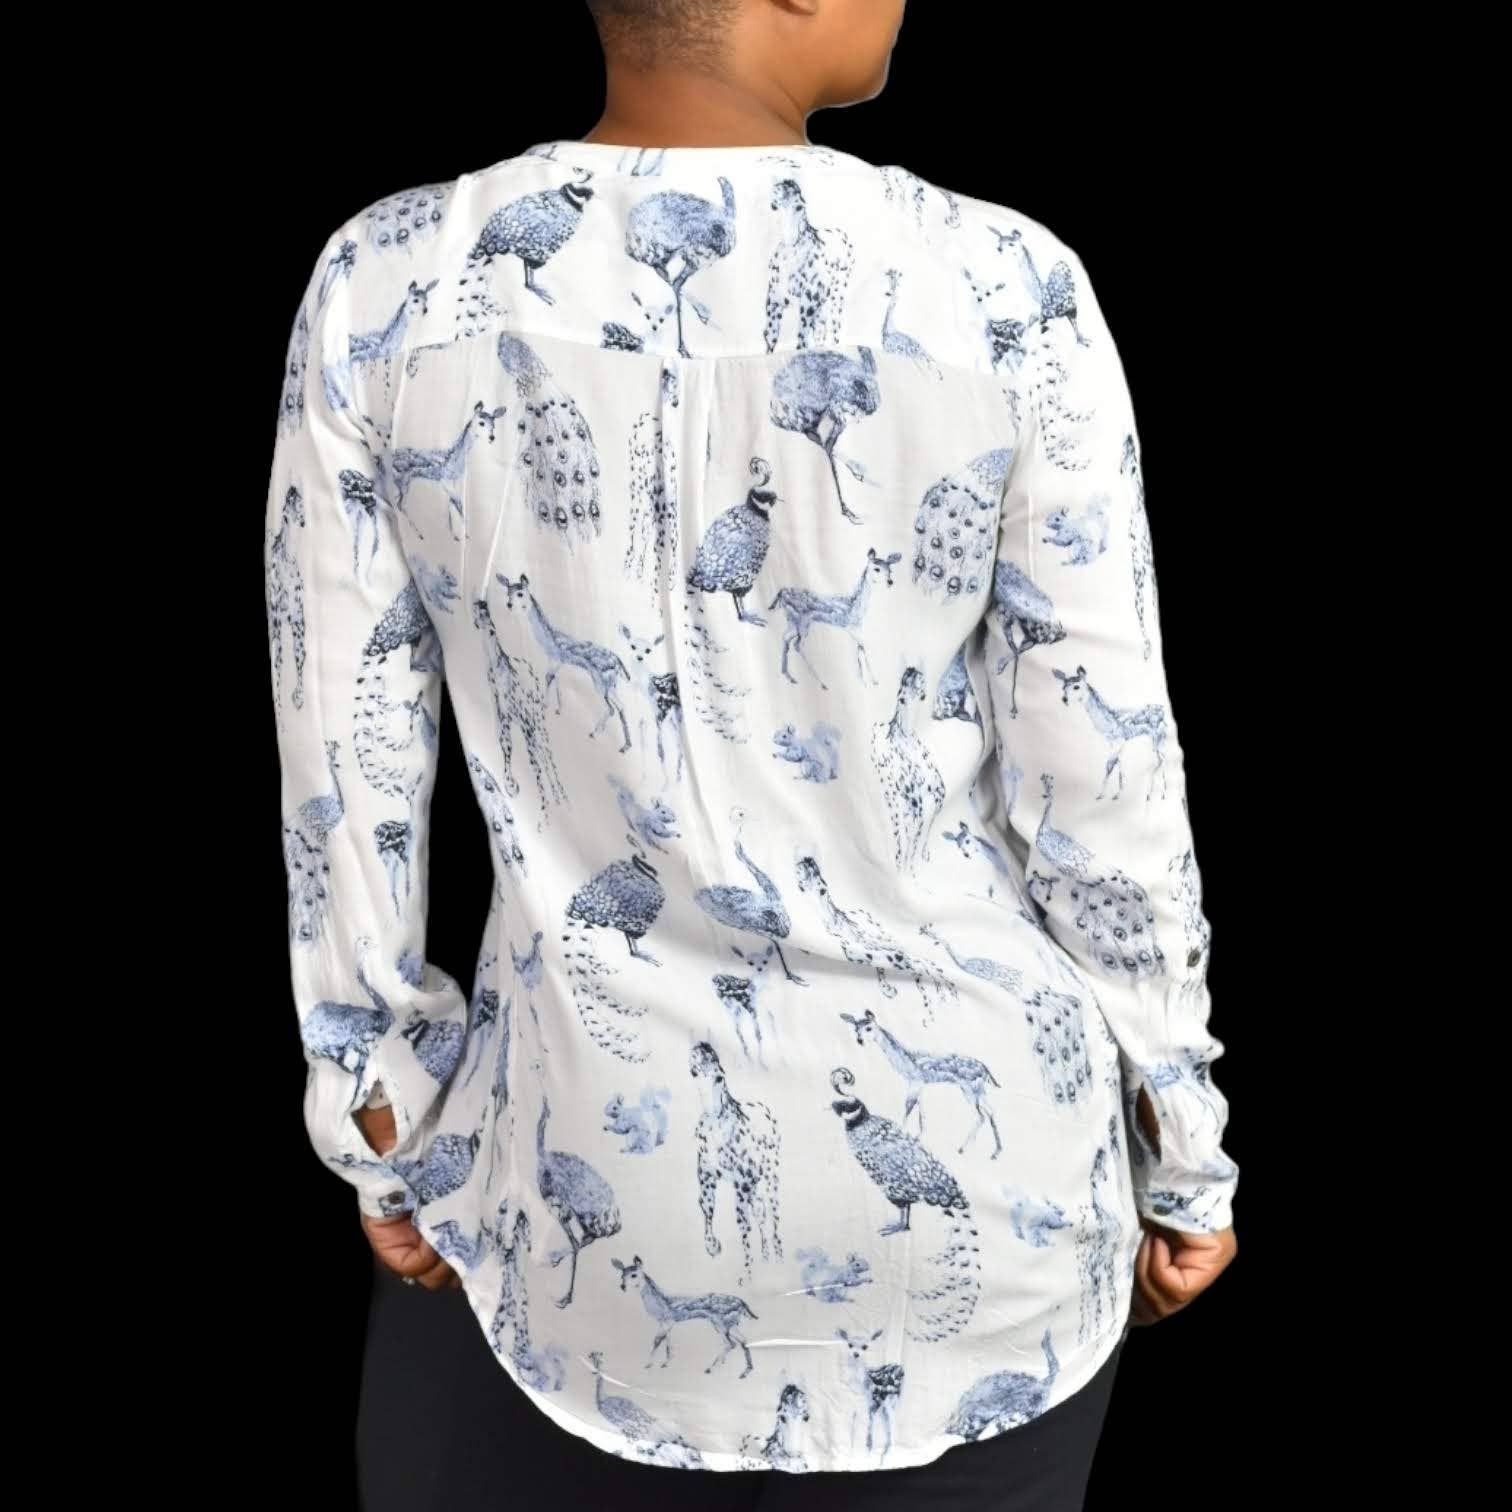 Maeve Wildlife Blouse Fauna Woodland Watercolor Peacock Blue Anthropologie Small